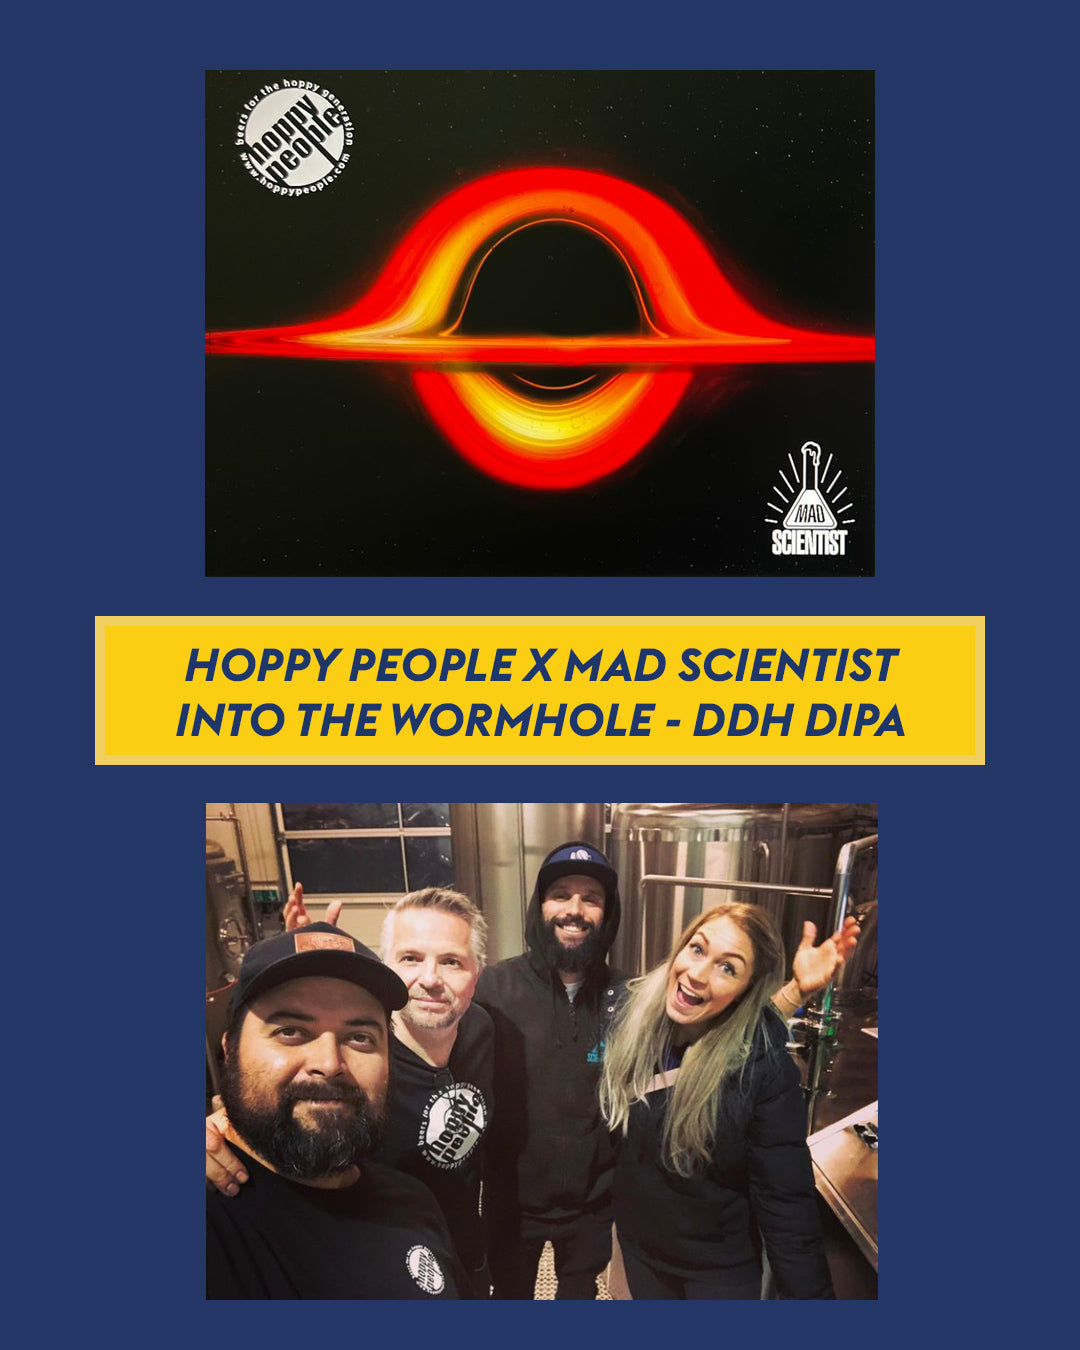 BREWERY OF THE MOMENT: HOPPY PEOPLE - DDH COLLAB TRIO!